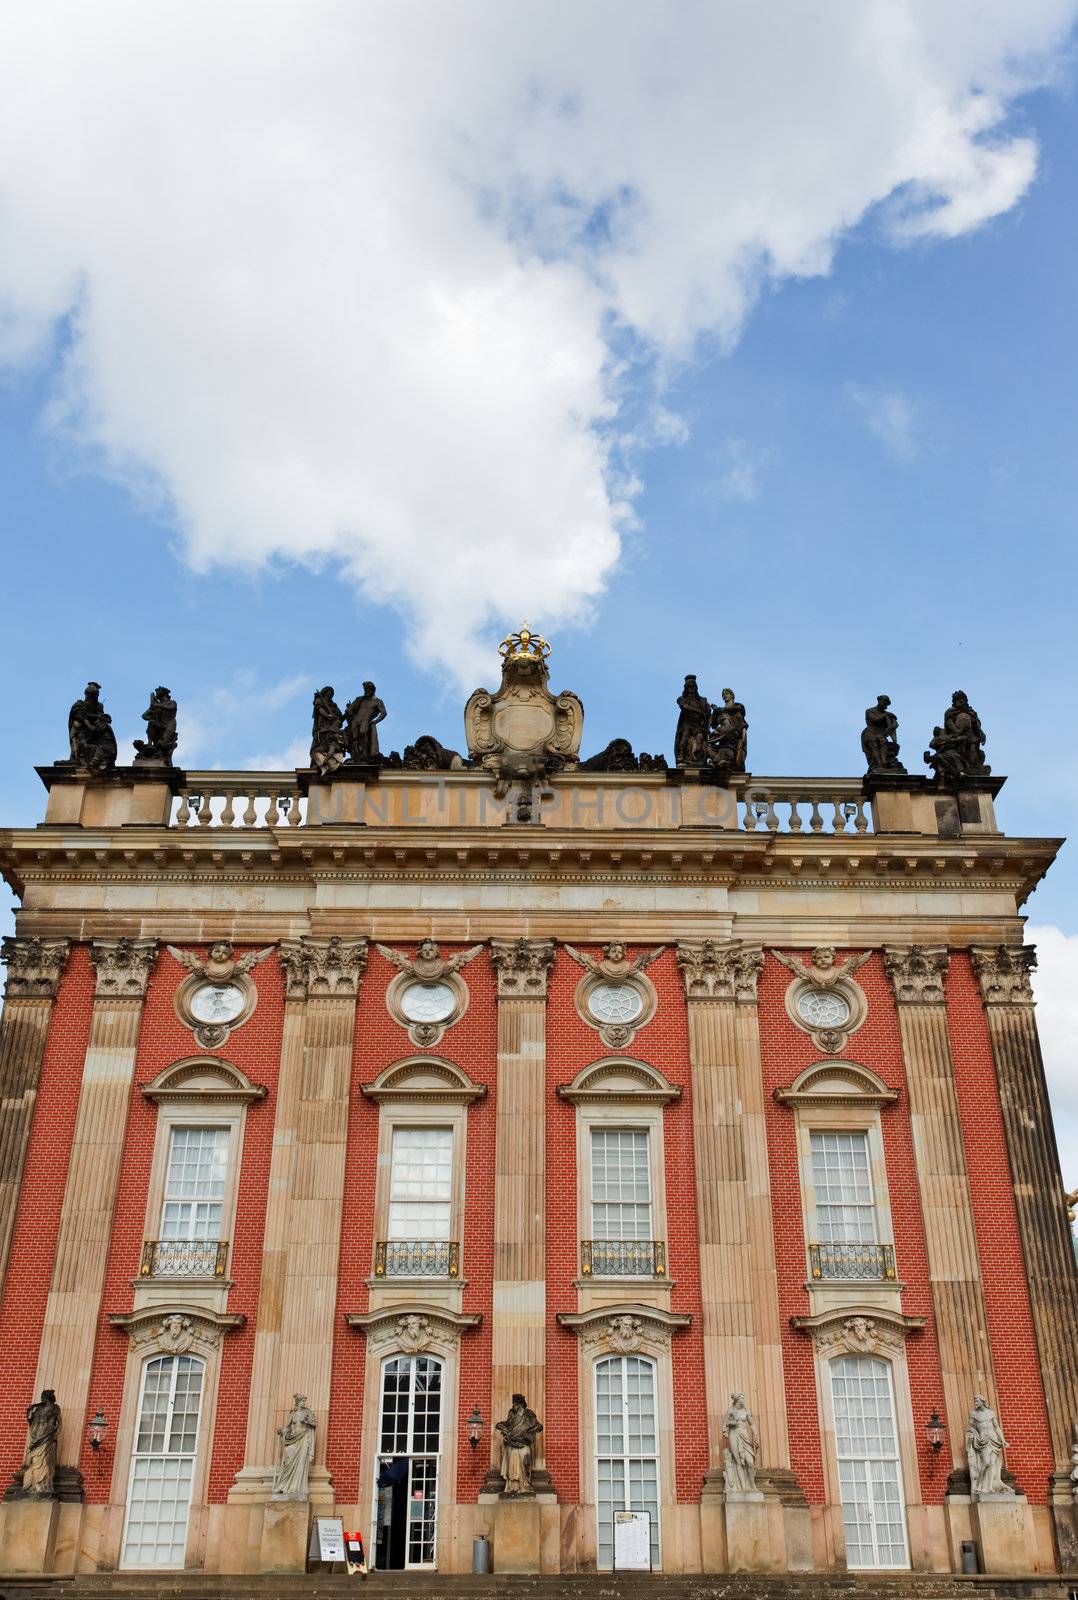 The New  Palace in Potsdam Germany on UNESCO World Heritage list